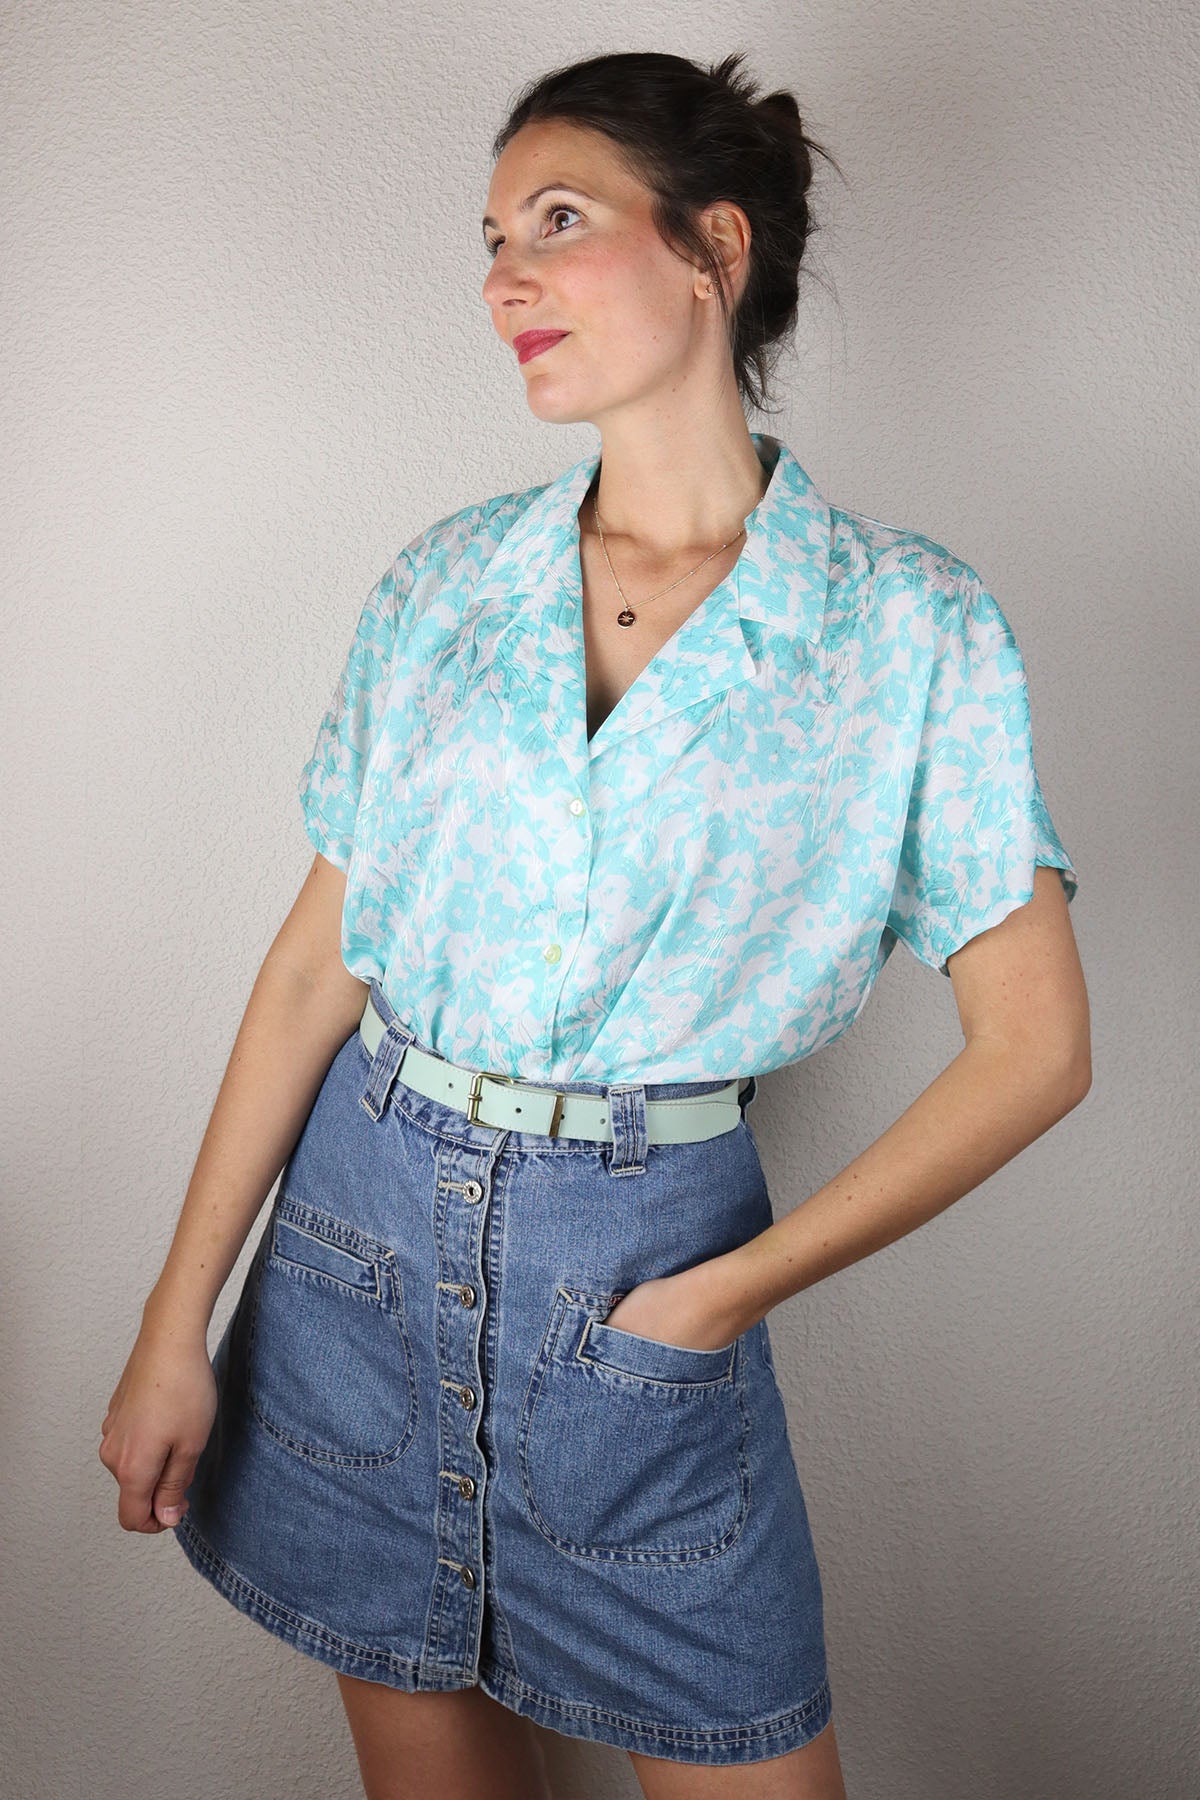 Pastell Vintage Blouse Revers